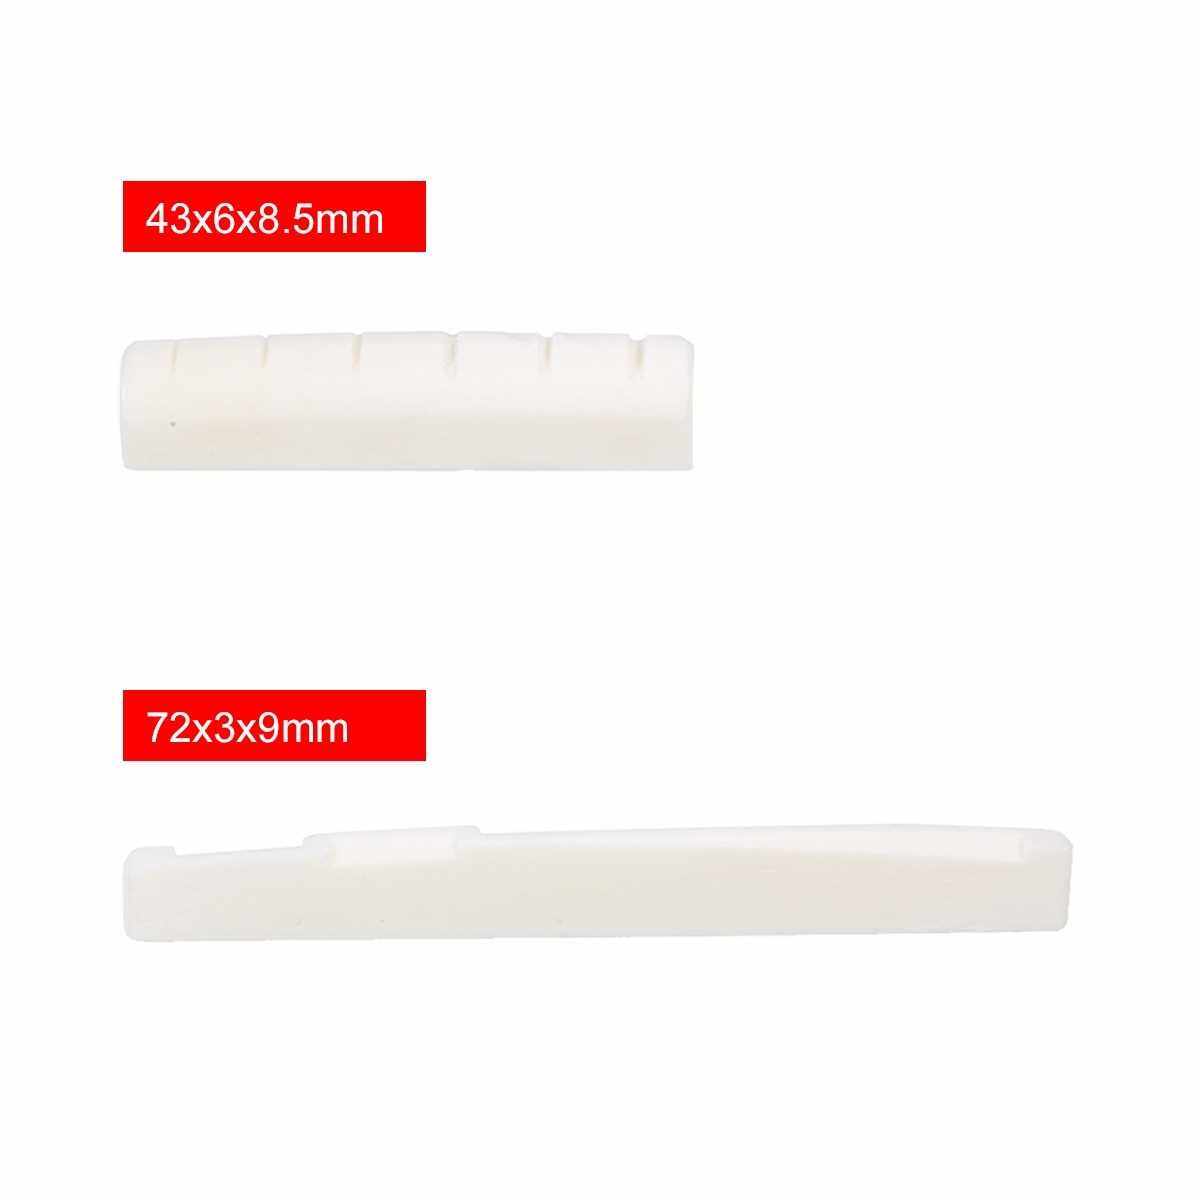 6 String Acoustic Guitar Nut and Saddle Pre-Slotted Bone Nut with Nut Files Set 320/240 Grits Sandpapers for Classical/Electric Guitar Parts Replacement Repair (Standard)